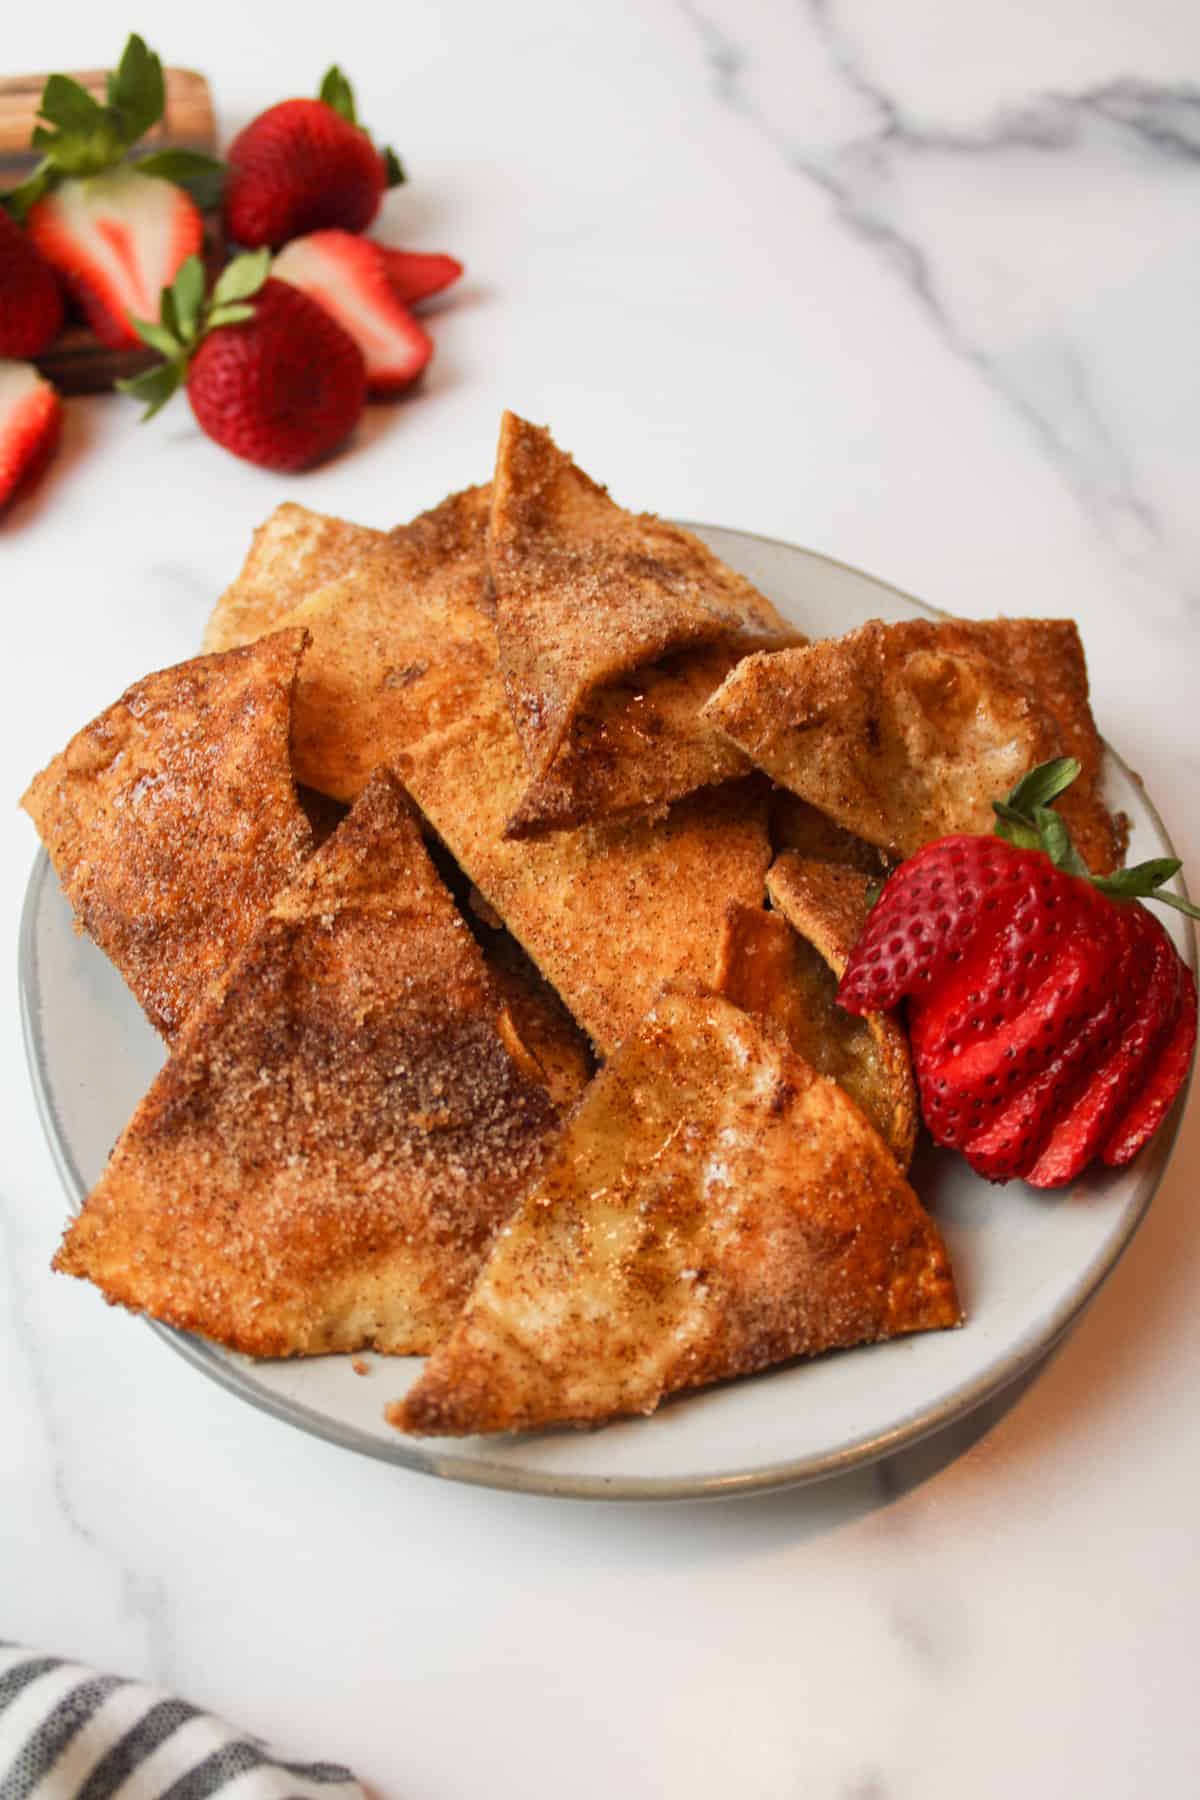 fresh strawberries and cinnamon sugar tortilla chips on a plate